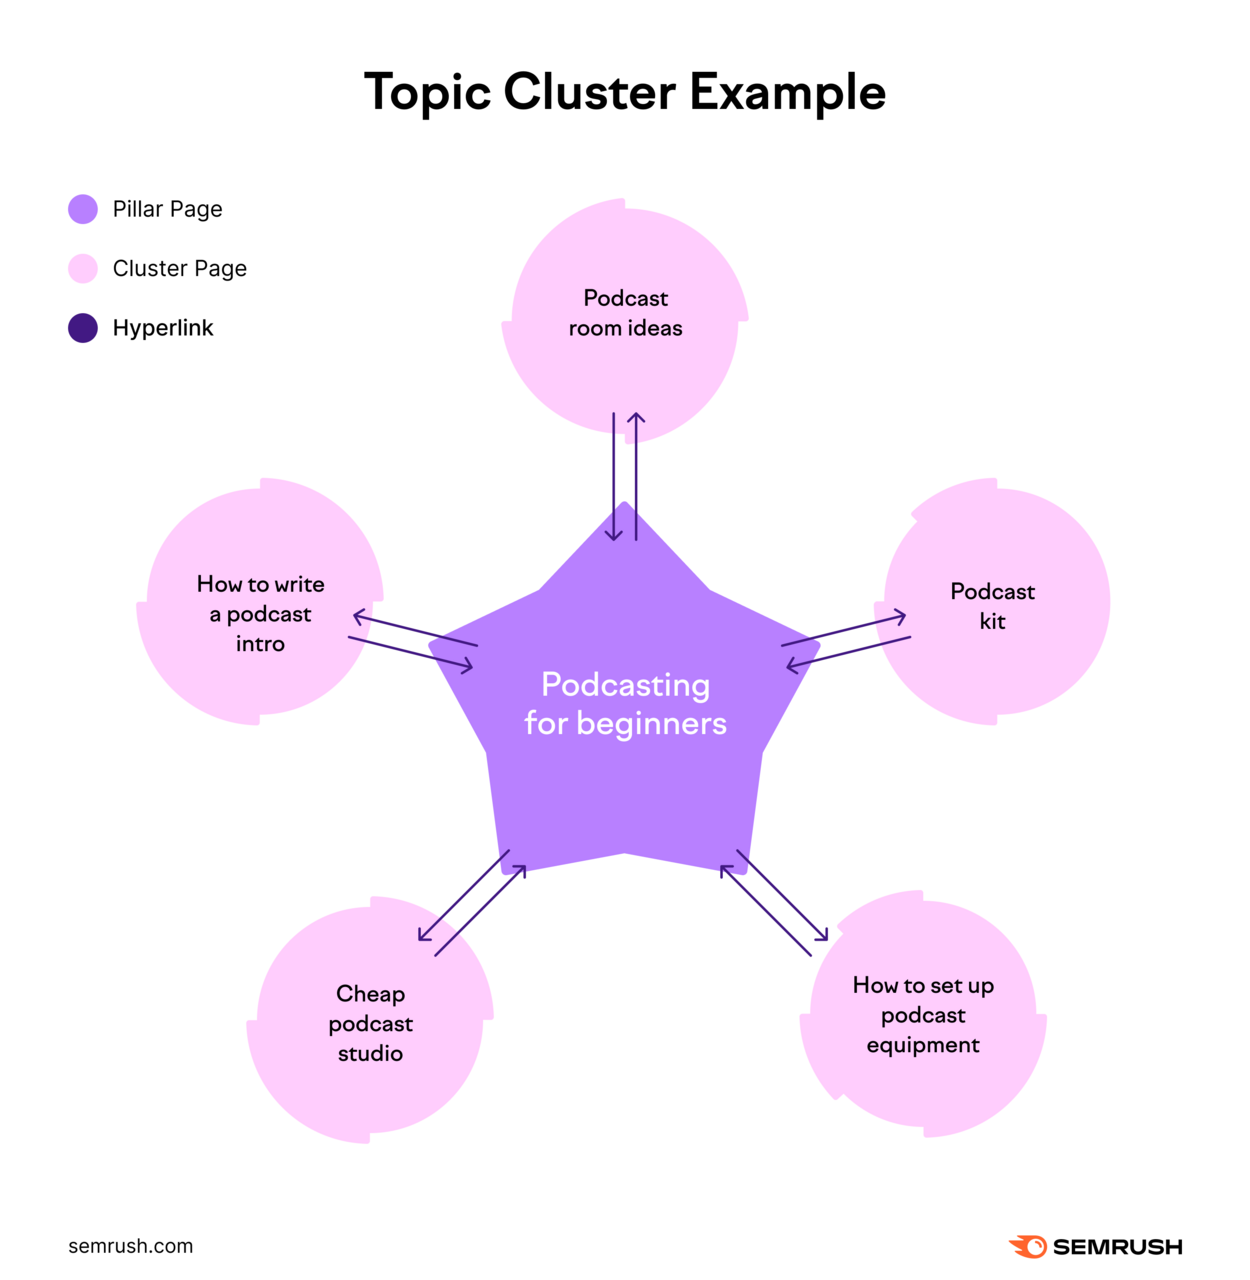 A topic cluster example for "podcasting for beginners"